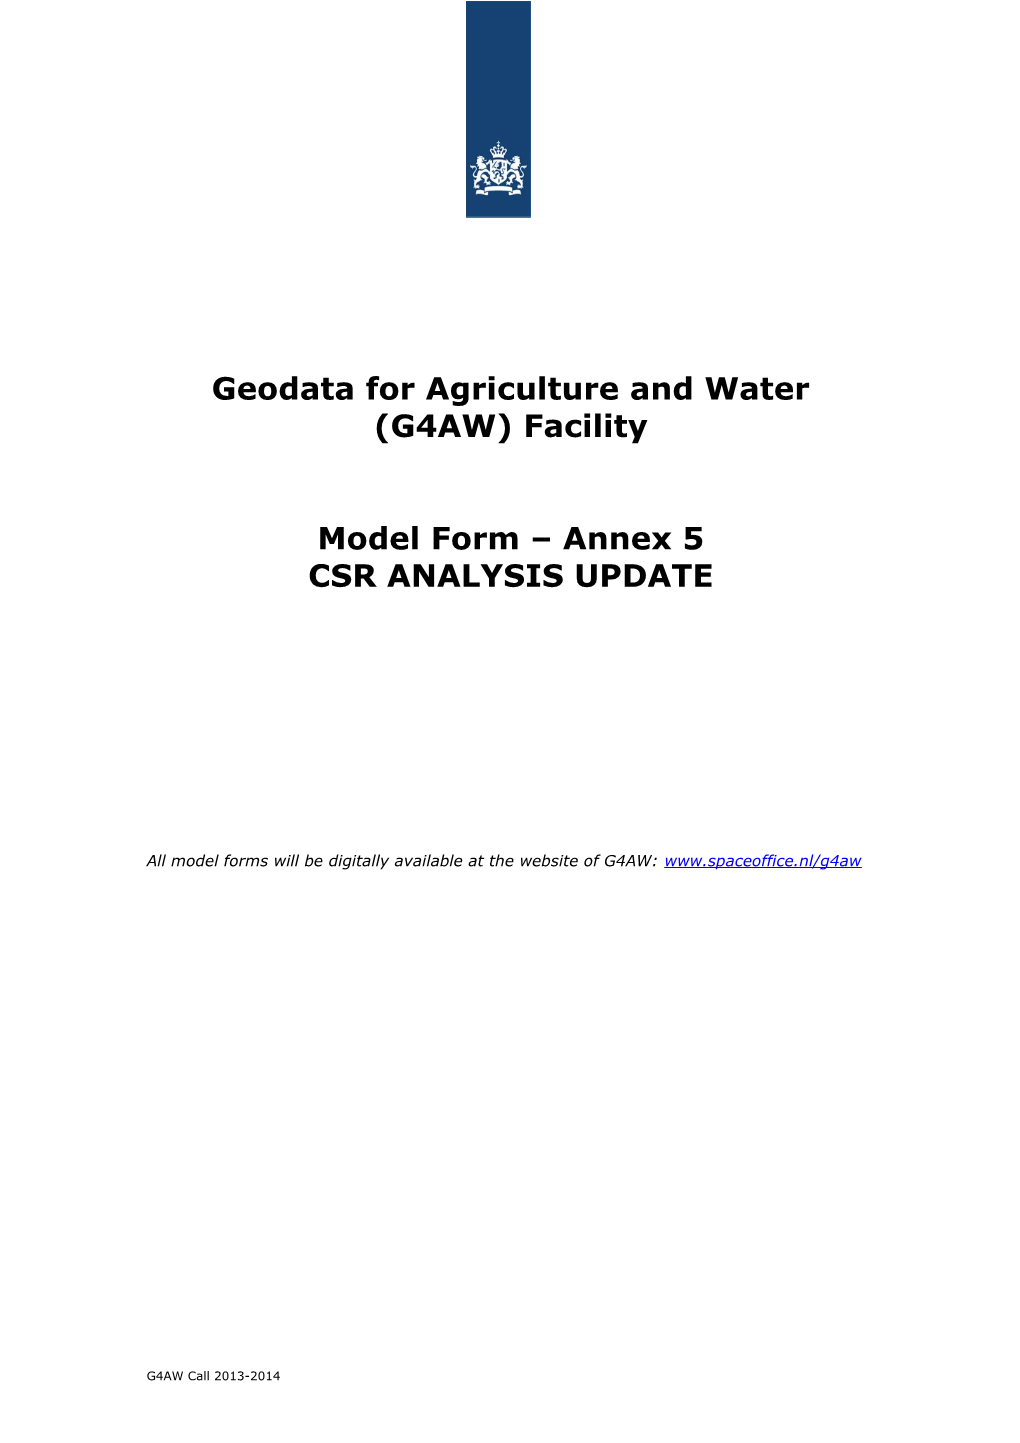 Geodata for Agriculture and Water (G4AW) Facility